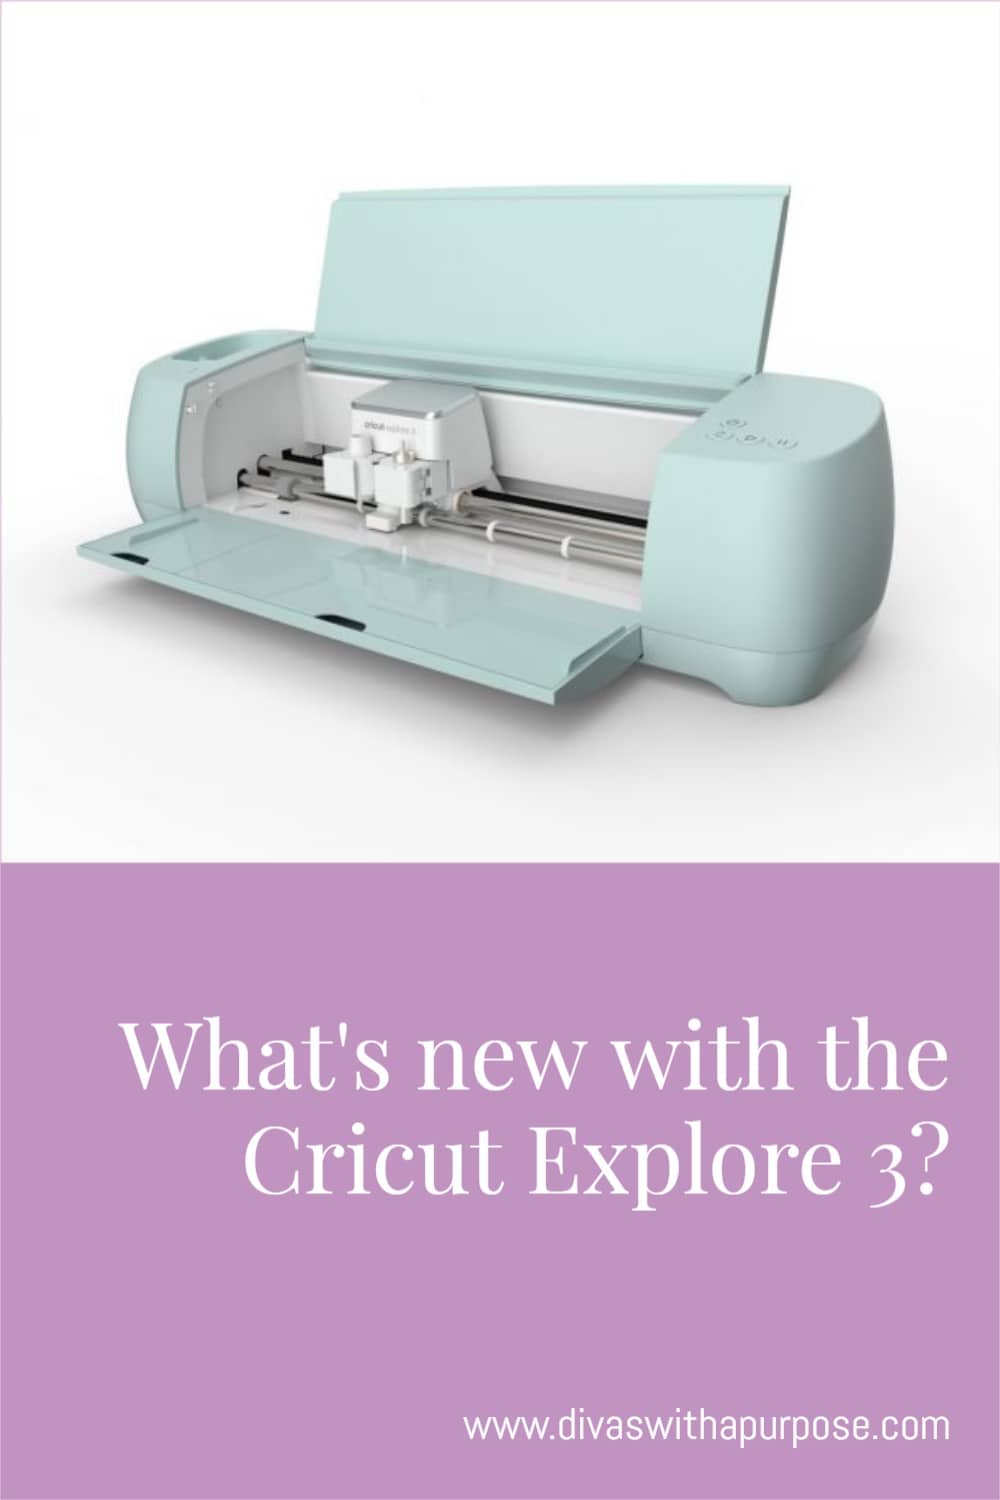 What's new with the Cricut Explore 3